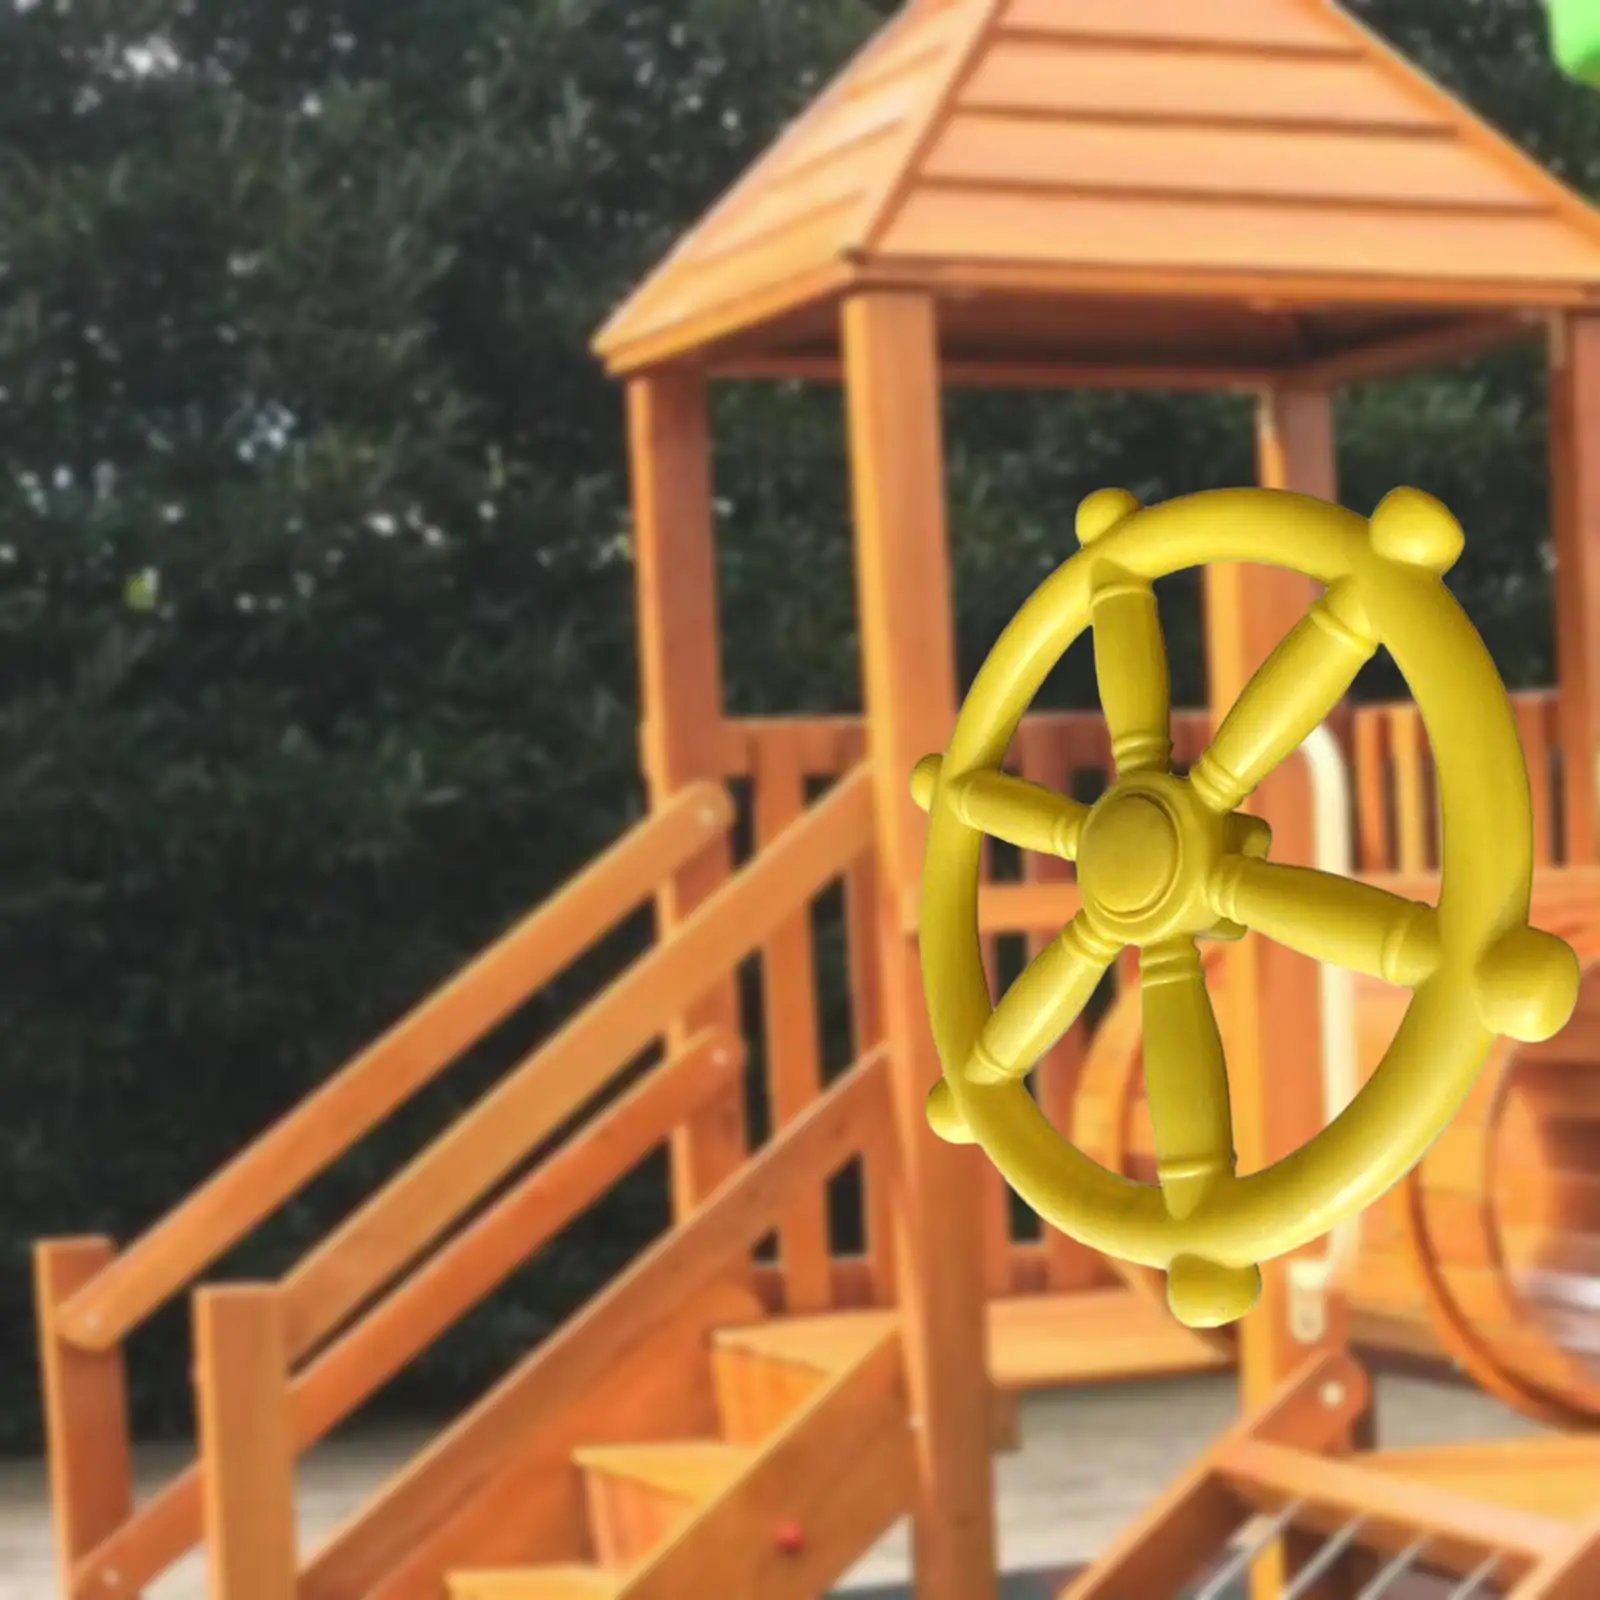 Pirate Ship Wheel Multipurpose Climb Props Playground Accessories for Park Amusement Park Outdoor Playhouse Tree House